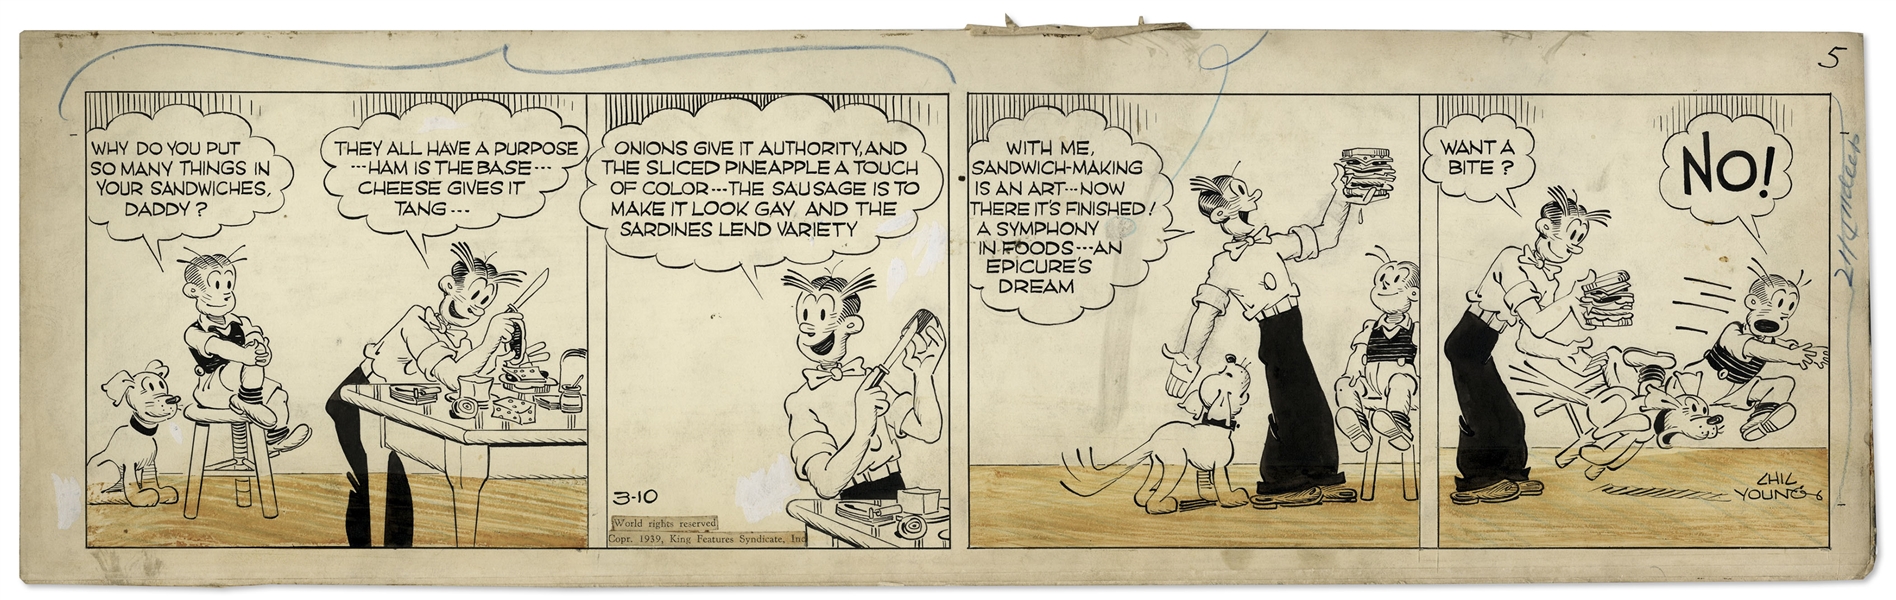 Chic Young Hand-Drawn ''Blondie'' Comic Strip From 1939 Titled ''The Big, Bad Wolf'' -- Dagwood Makes One of His Signature Sandwiches